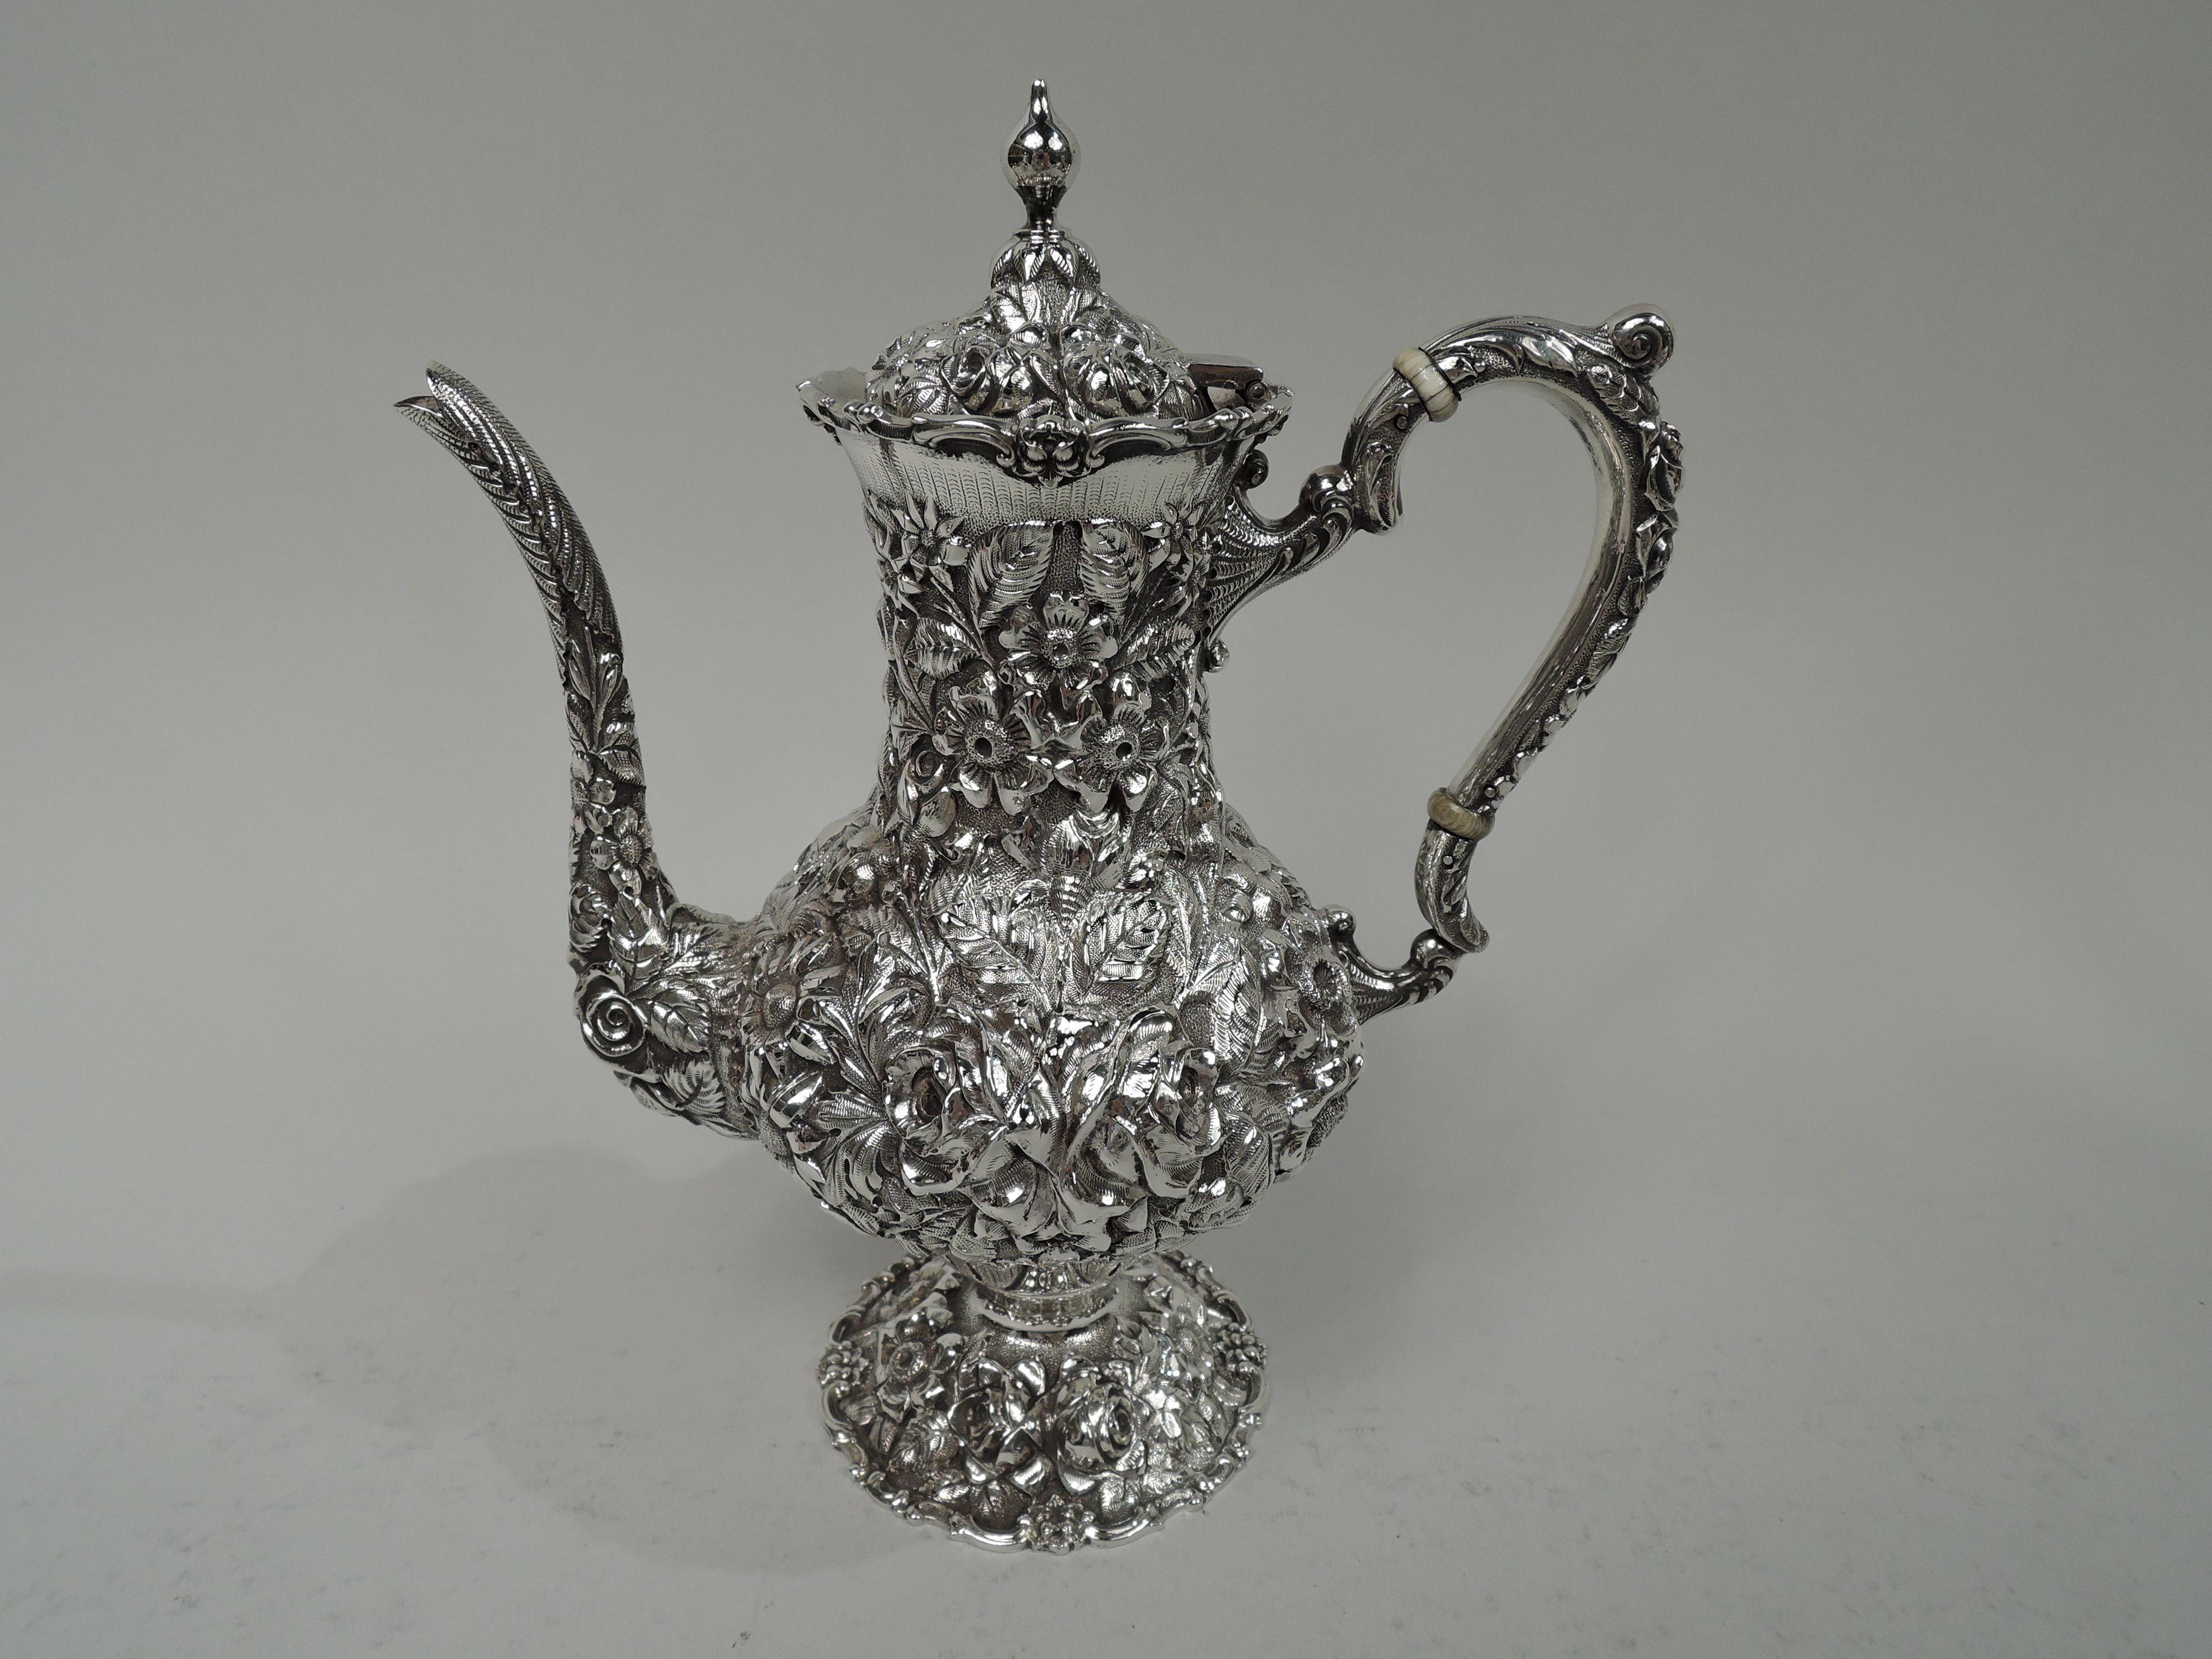 Edwardian sterling silver 3-piece coffee set. Made by Stieff in Baltimore in 1918. This set comprises coffeepot, creamer, and sugar. Each: Bellied bowl on raised foot. Handles high-looping and leaf-capped. Covers domed with vasiform finial.